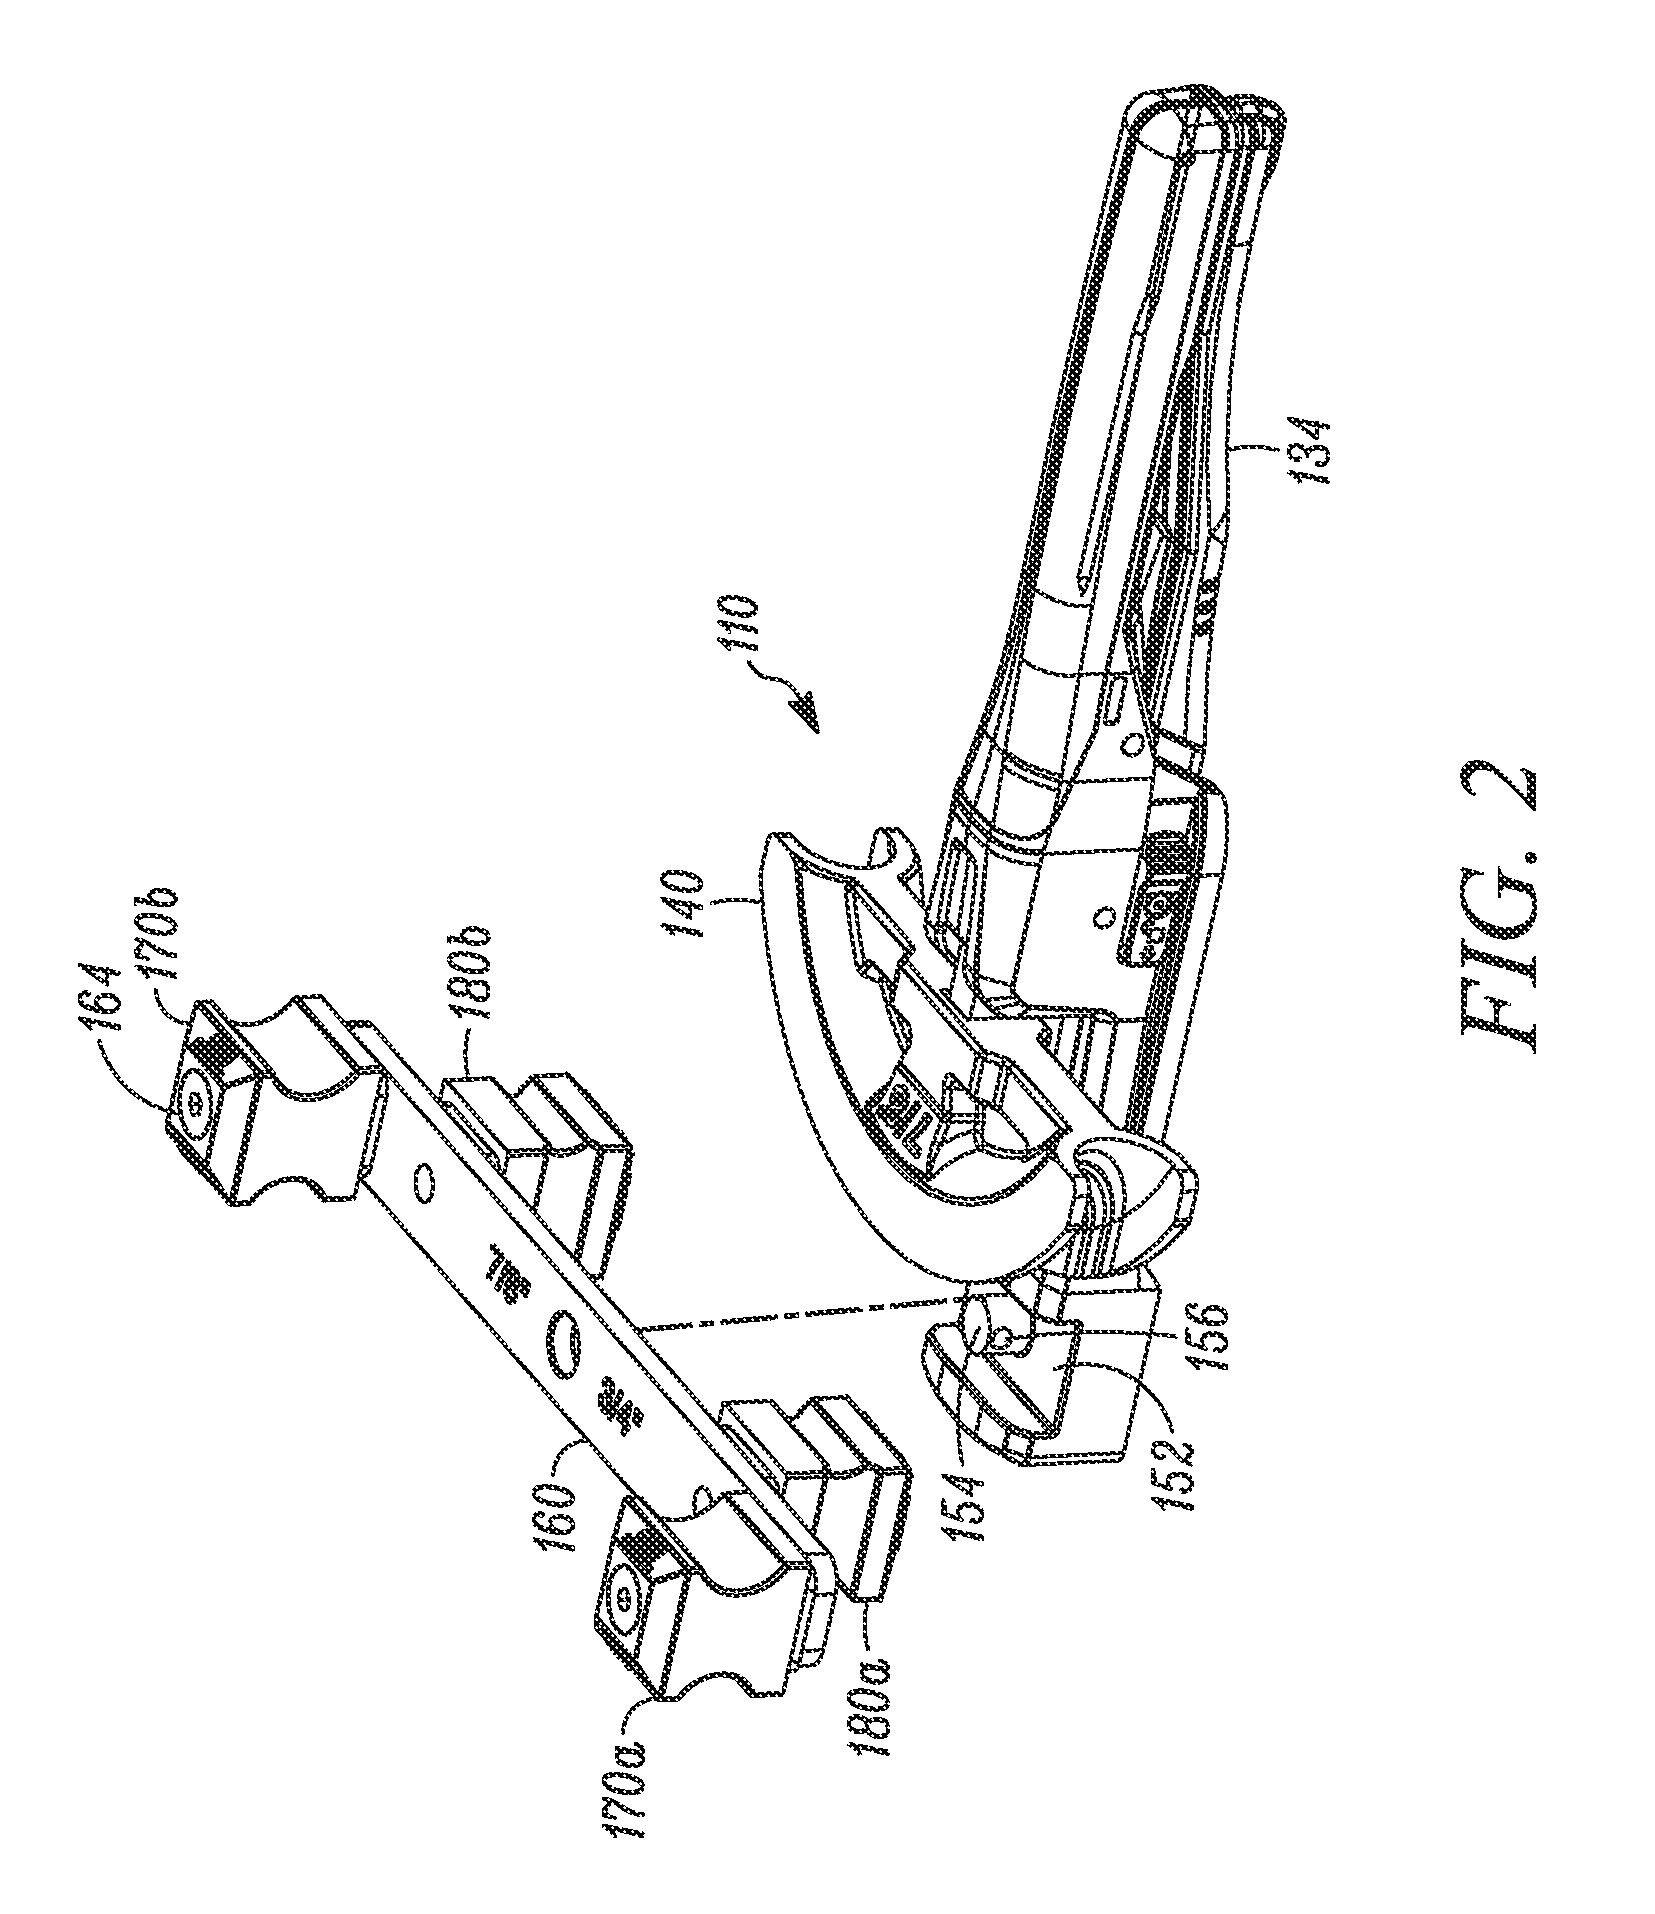 Tube and pipe benders and methods of bending same